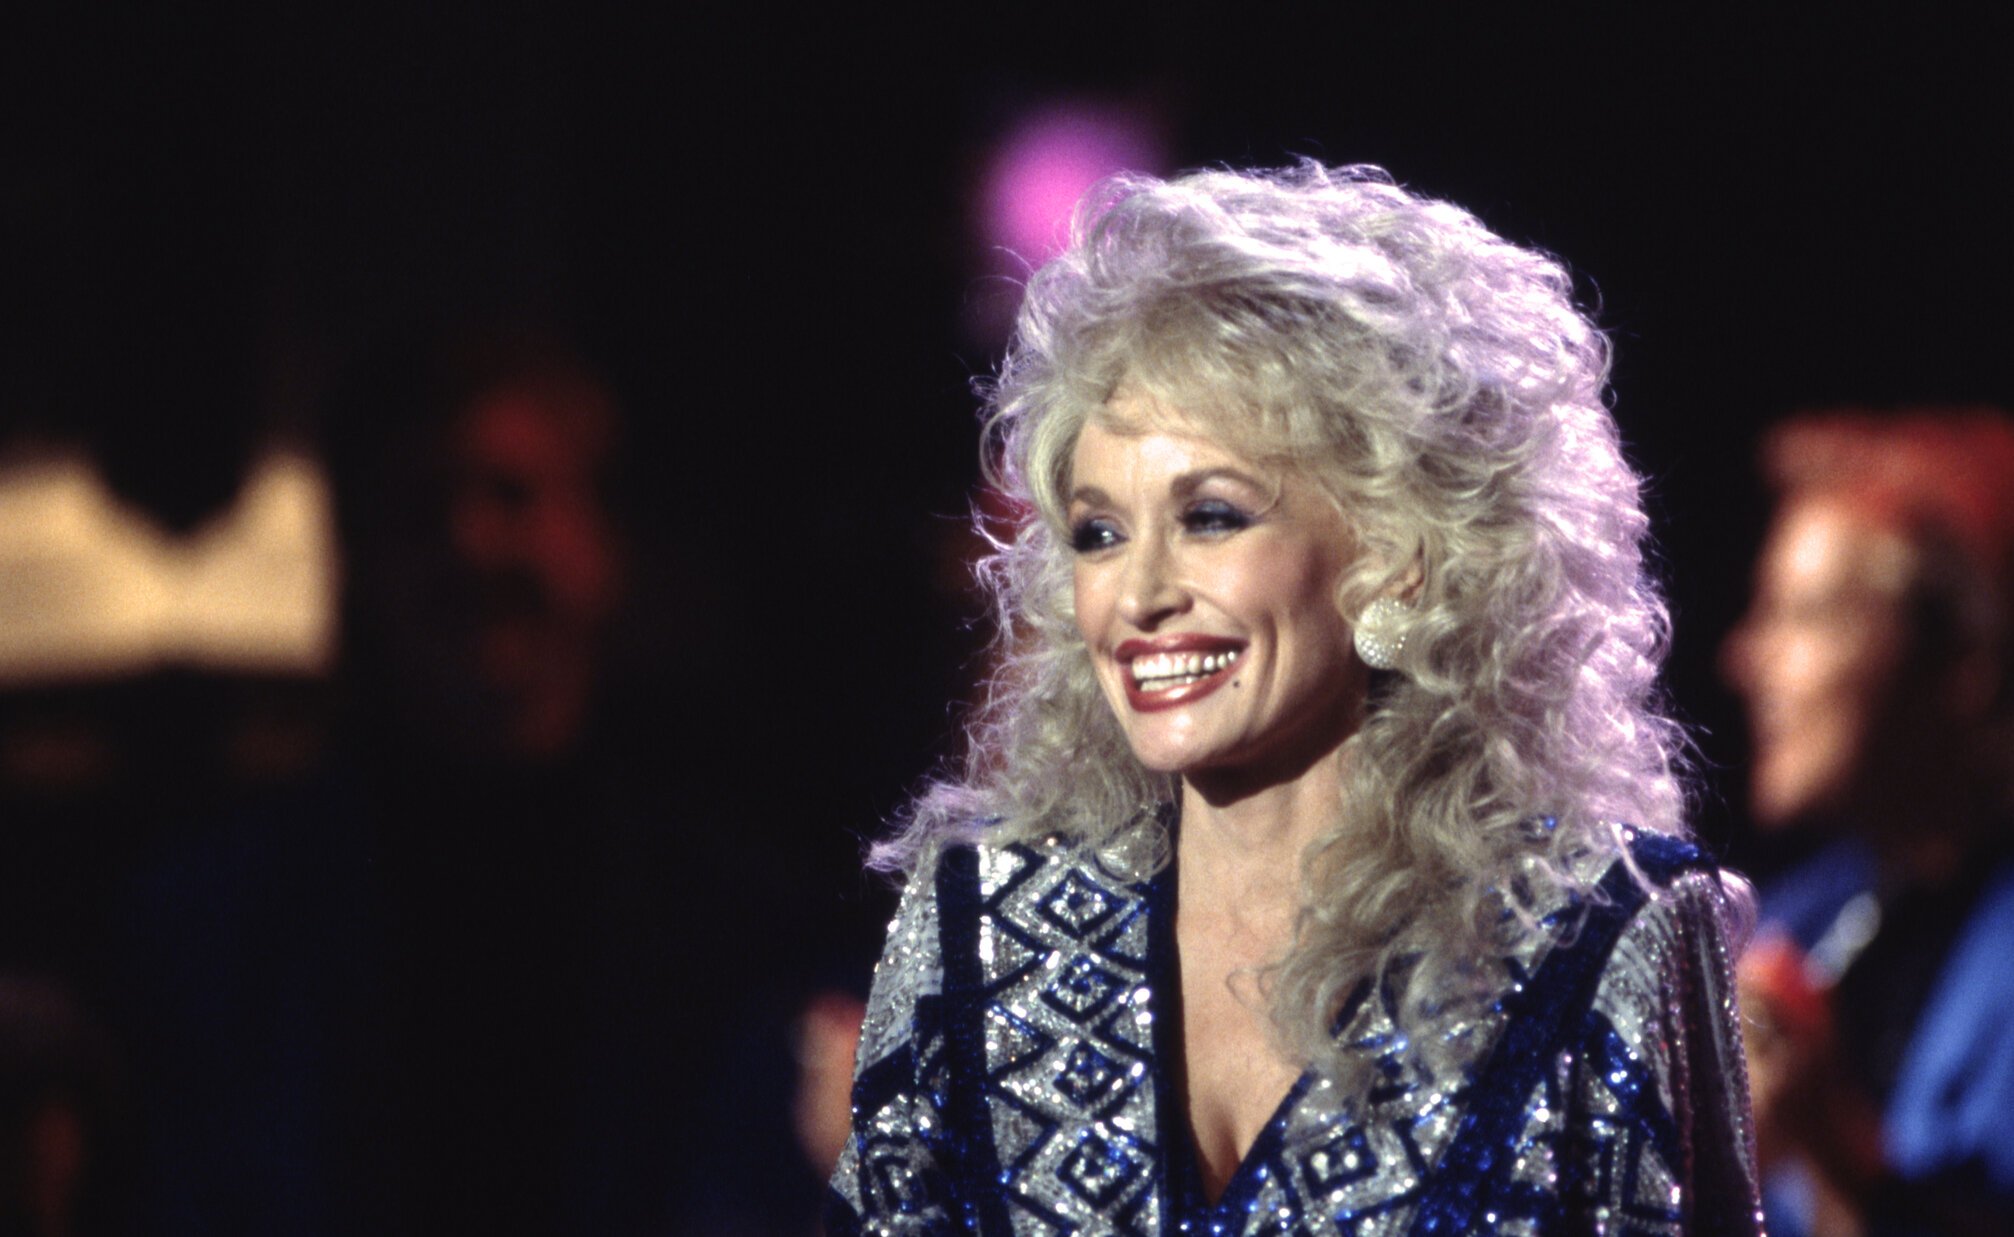 A close-up of Dolly Parton in 'Dolly' in 1988.